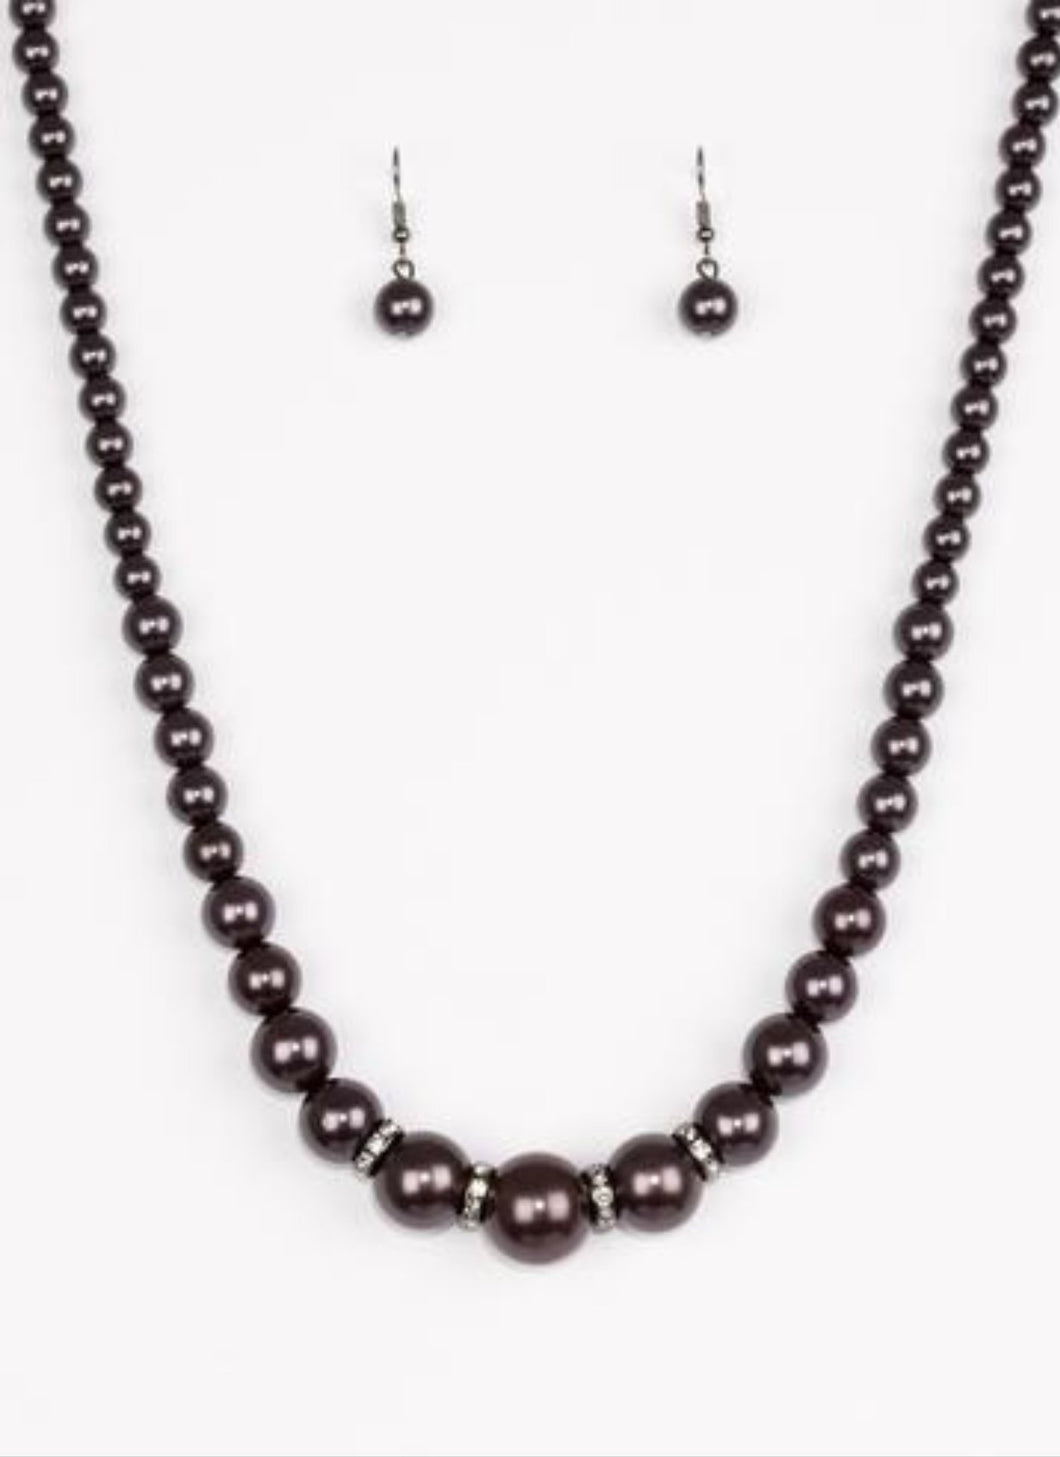 Party Pearls Black Pearl Necklace and Earrings